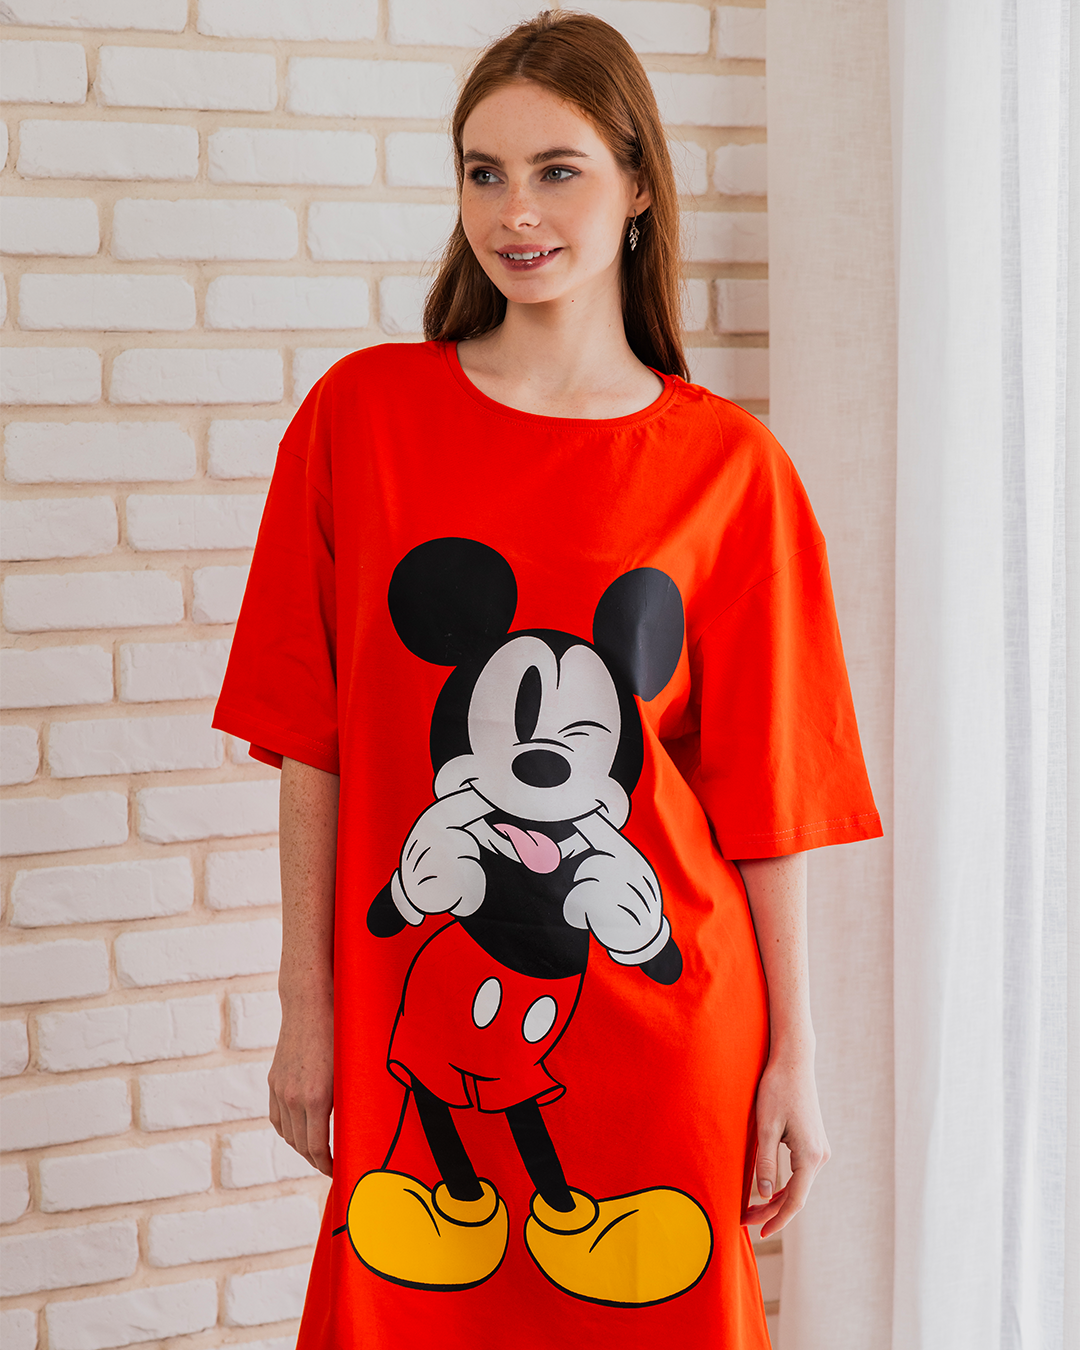 Women's half-sleeved night-shirt with Mickey Mouse print on the chest